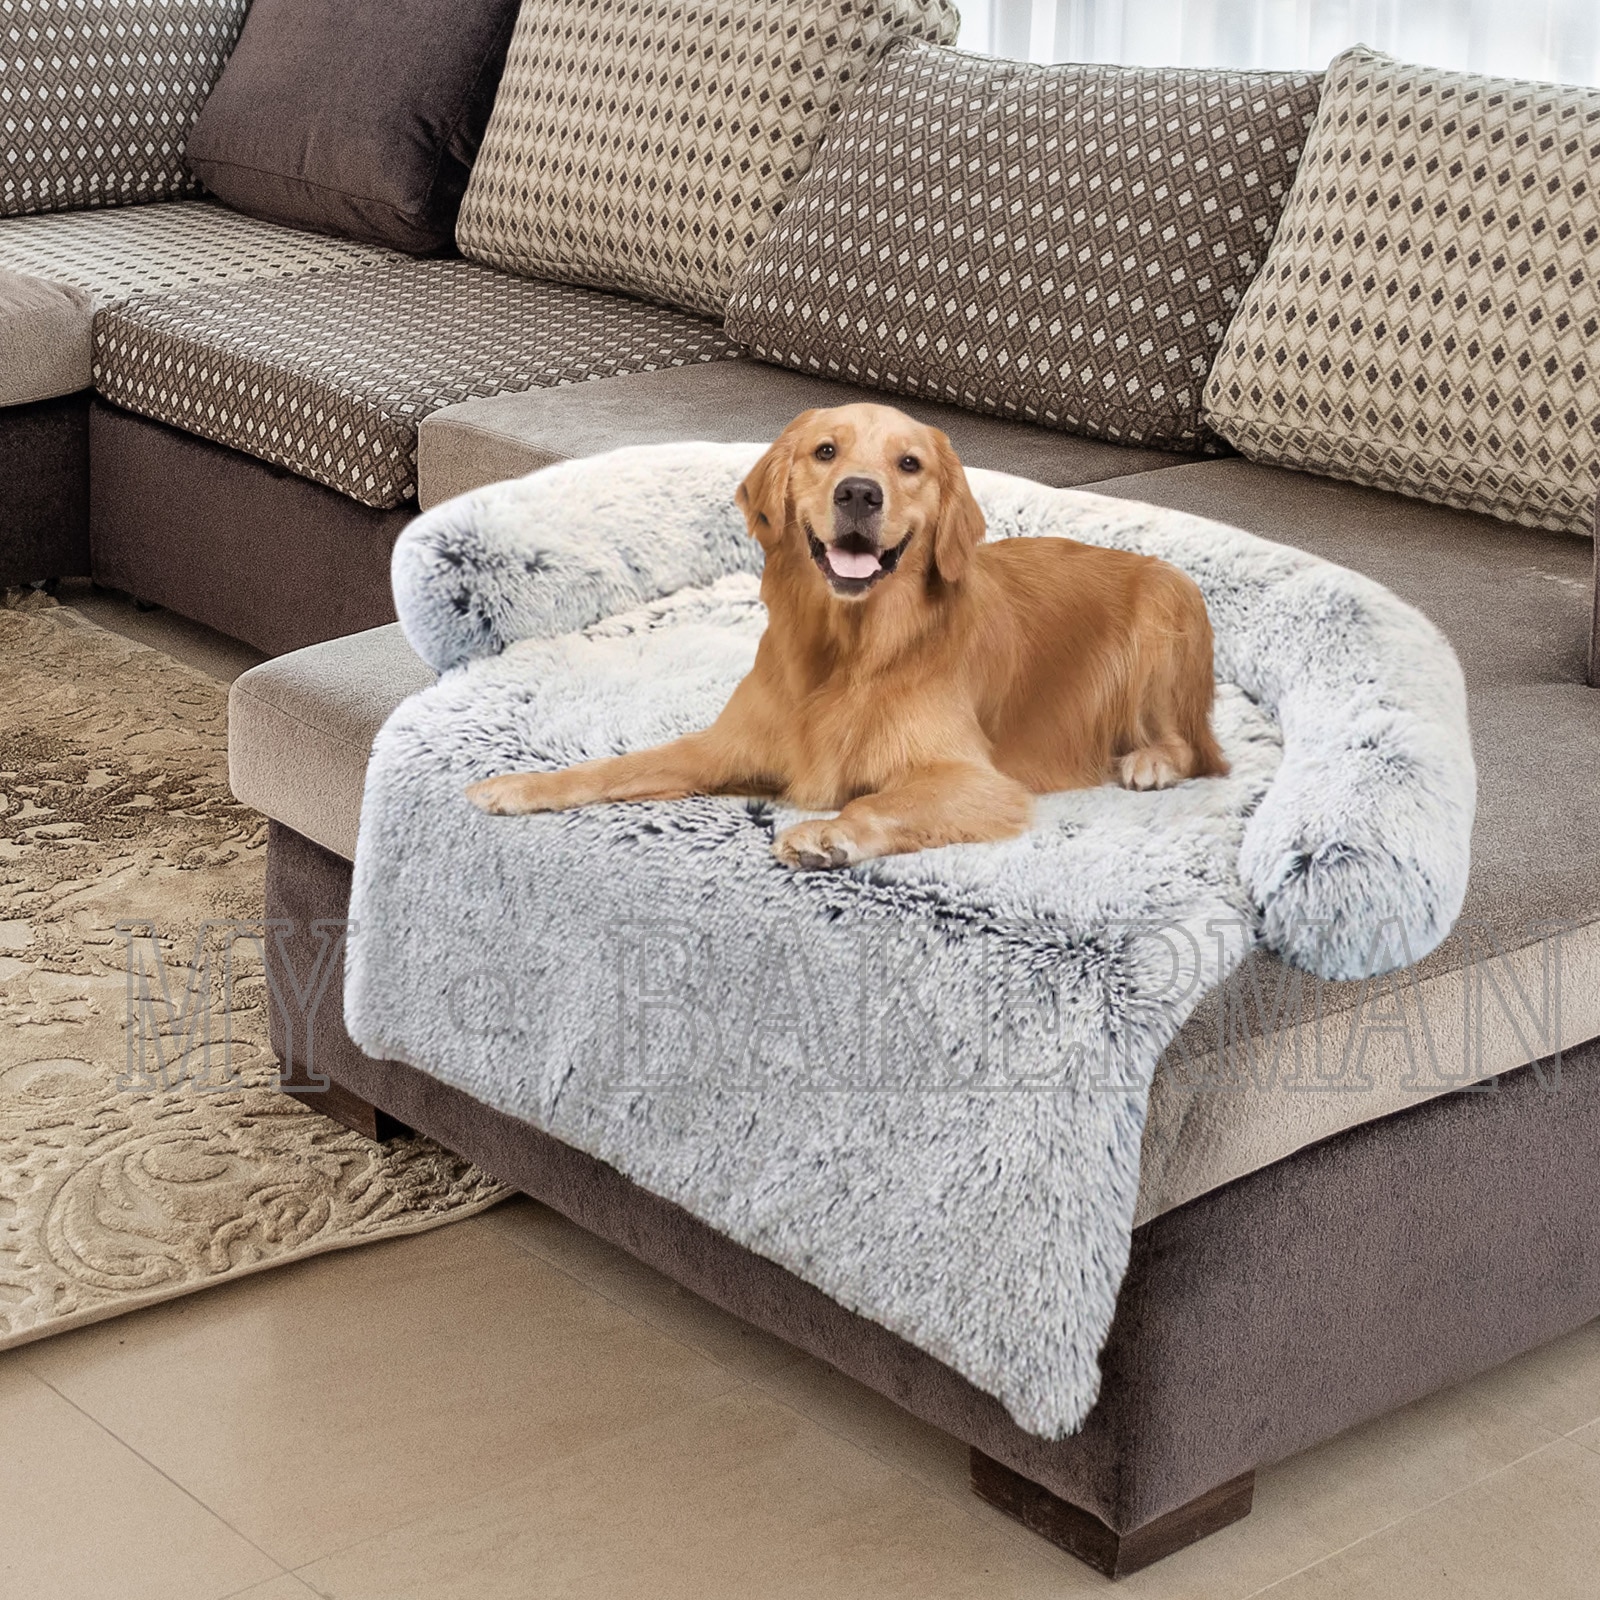 989737856 1 - Large Plush Dog Sofa Bed Couch Protector - thepamperedpooch-co, pet-beds, dog-beds